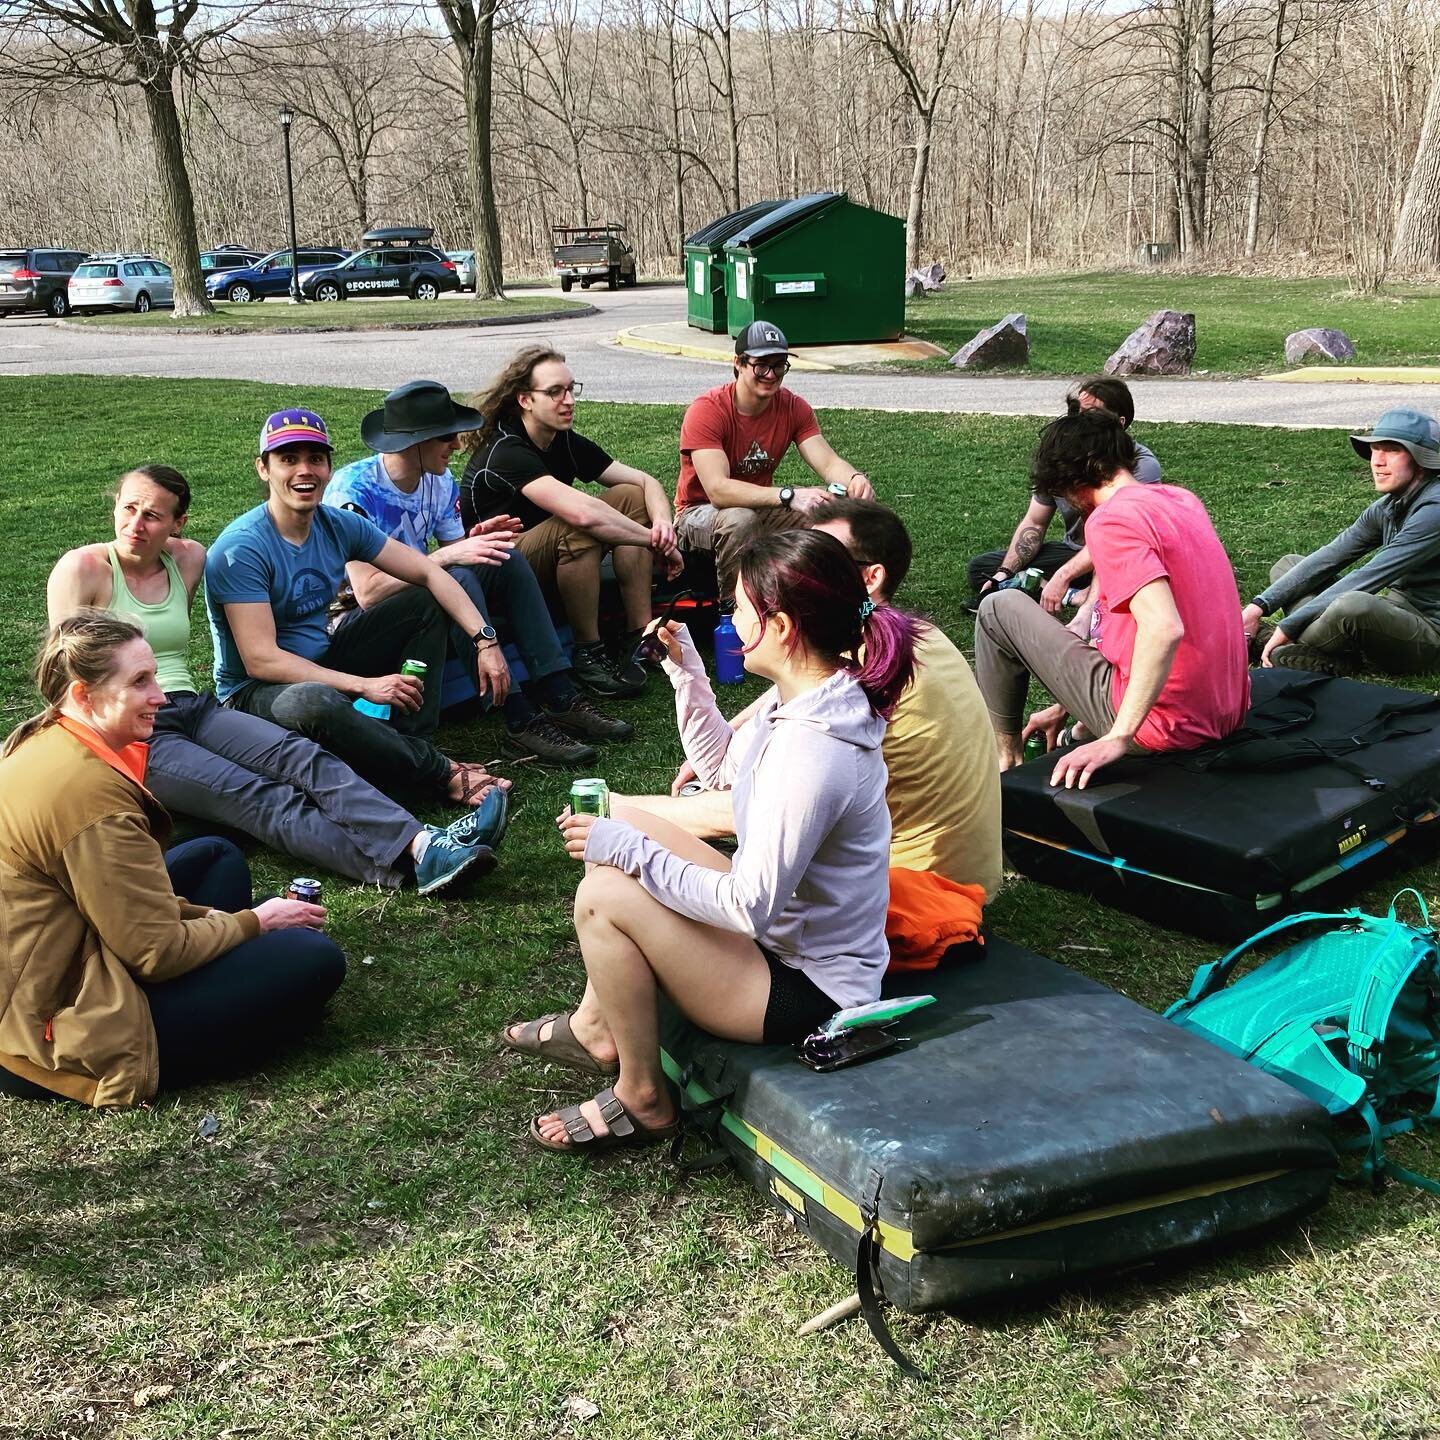 Come hang out with us! Basecamp with WCA this weekend at Devil&rsquo;s Lake State Park. We have a group campsite reserved for the weekend and you can camp with us! It&rsquo;s $10/person for Friday and Saturday nights. Bring your own camping and climb